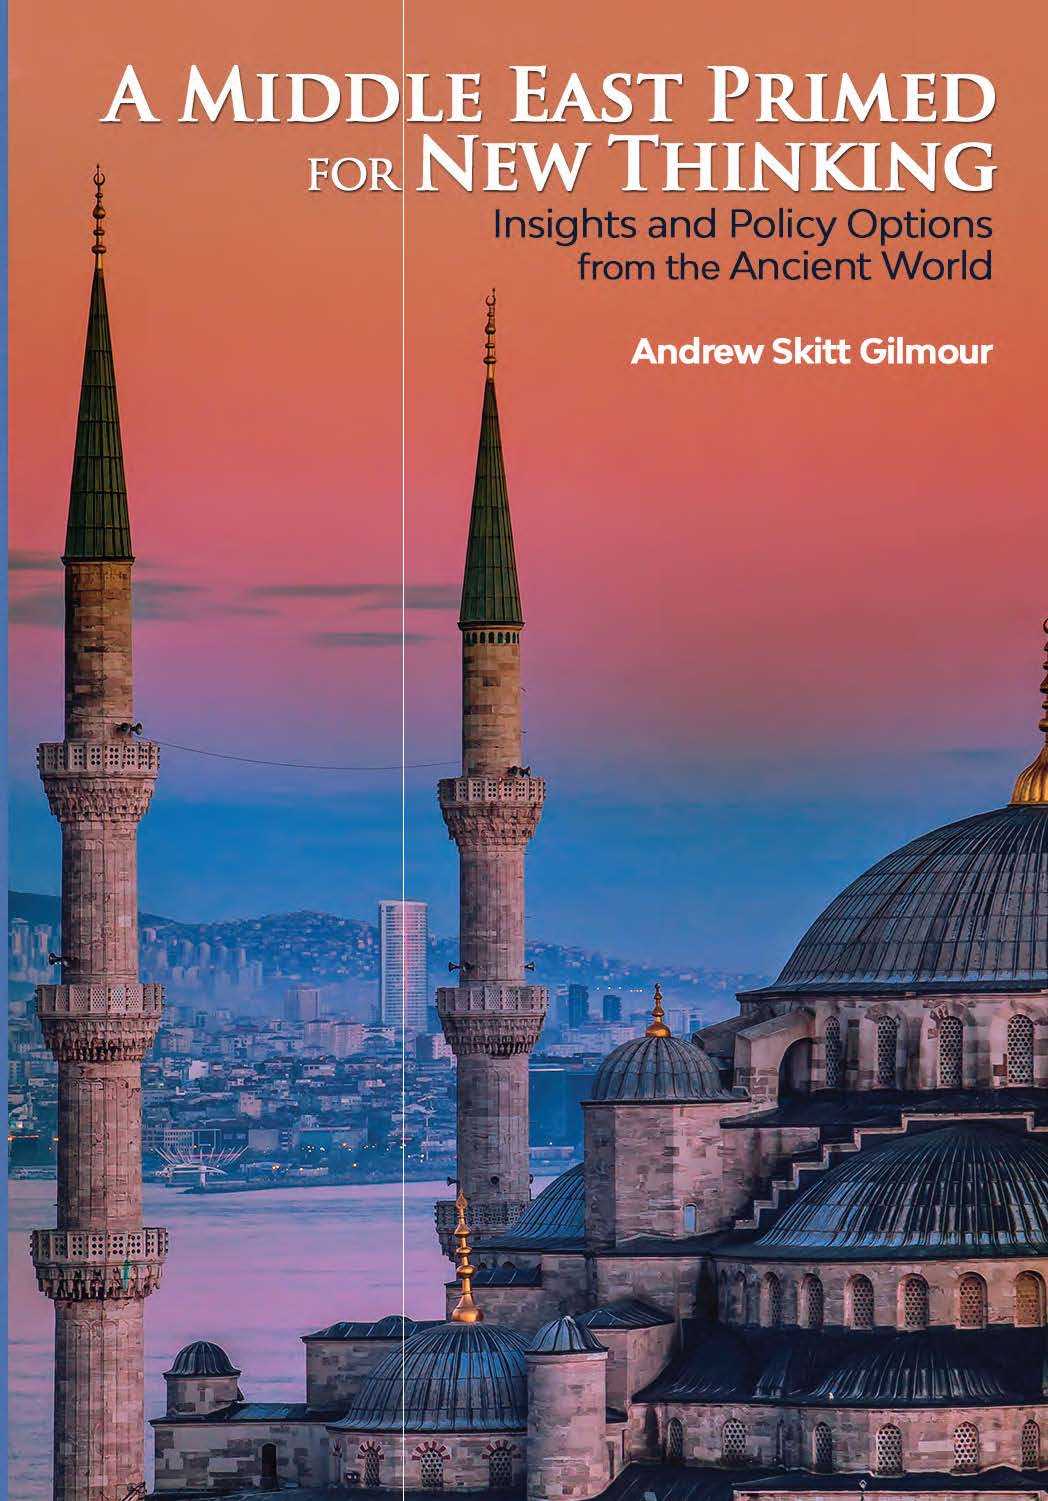 Cover of monograph "A Middle East Primed for New Thinking: Insights and Policy Options from the Ancient World," showing a minaret the Turkish strait in the background